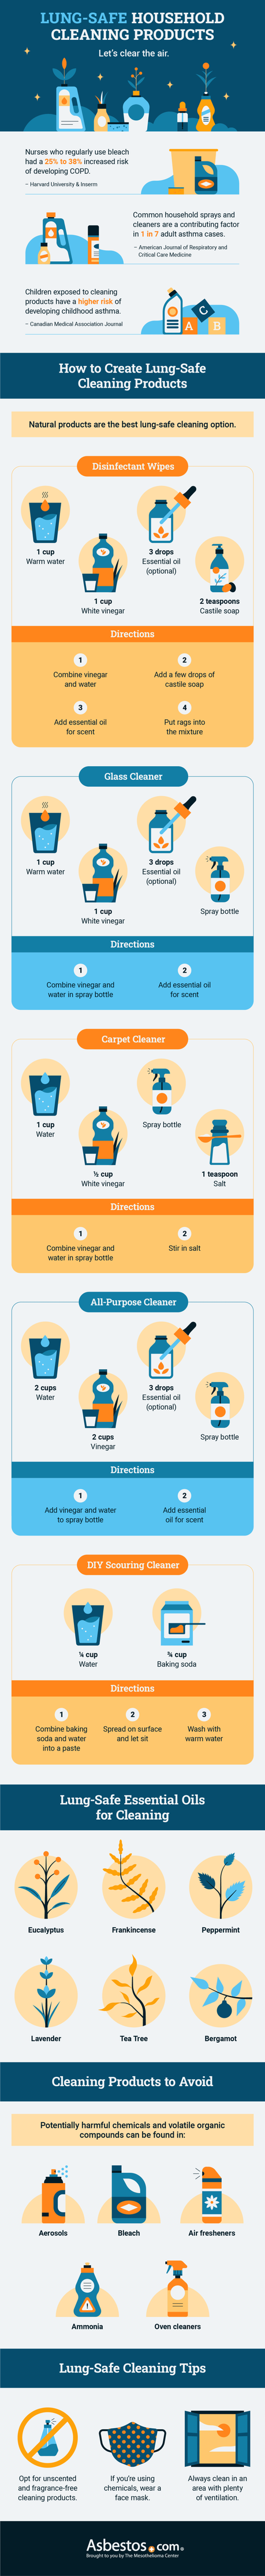 DIY Lung-Safe Cleaning Solutions for Your Home (Infographic)